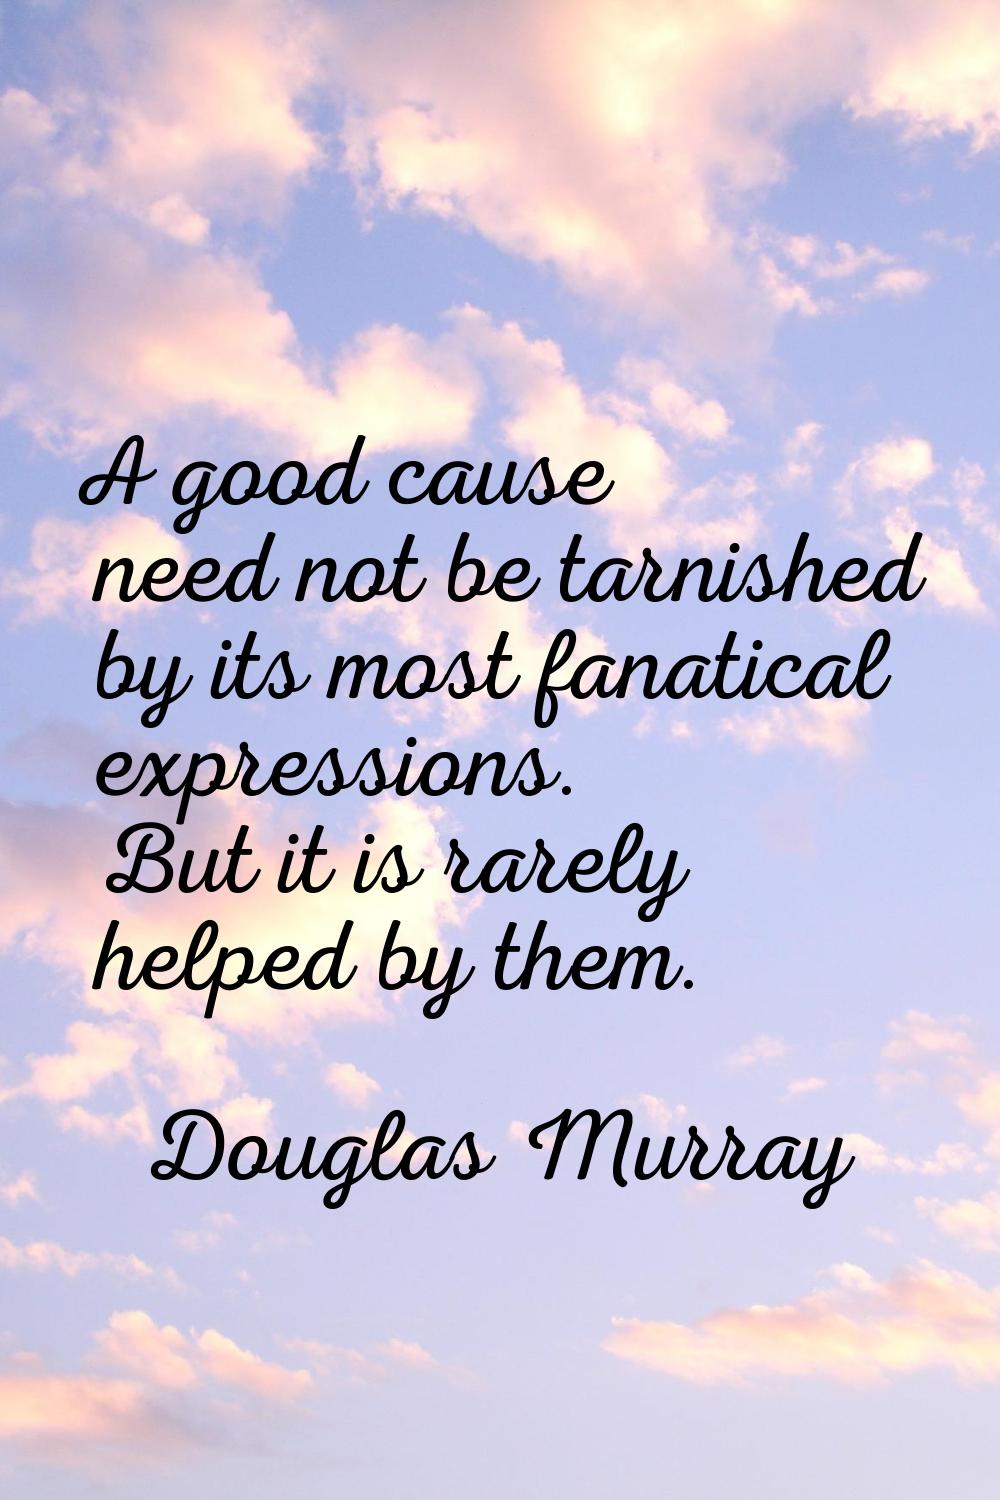 A good cause need not be tarnished by its most fanatical expressions. But it is rarely helped by th